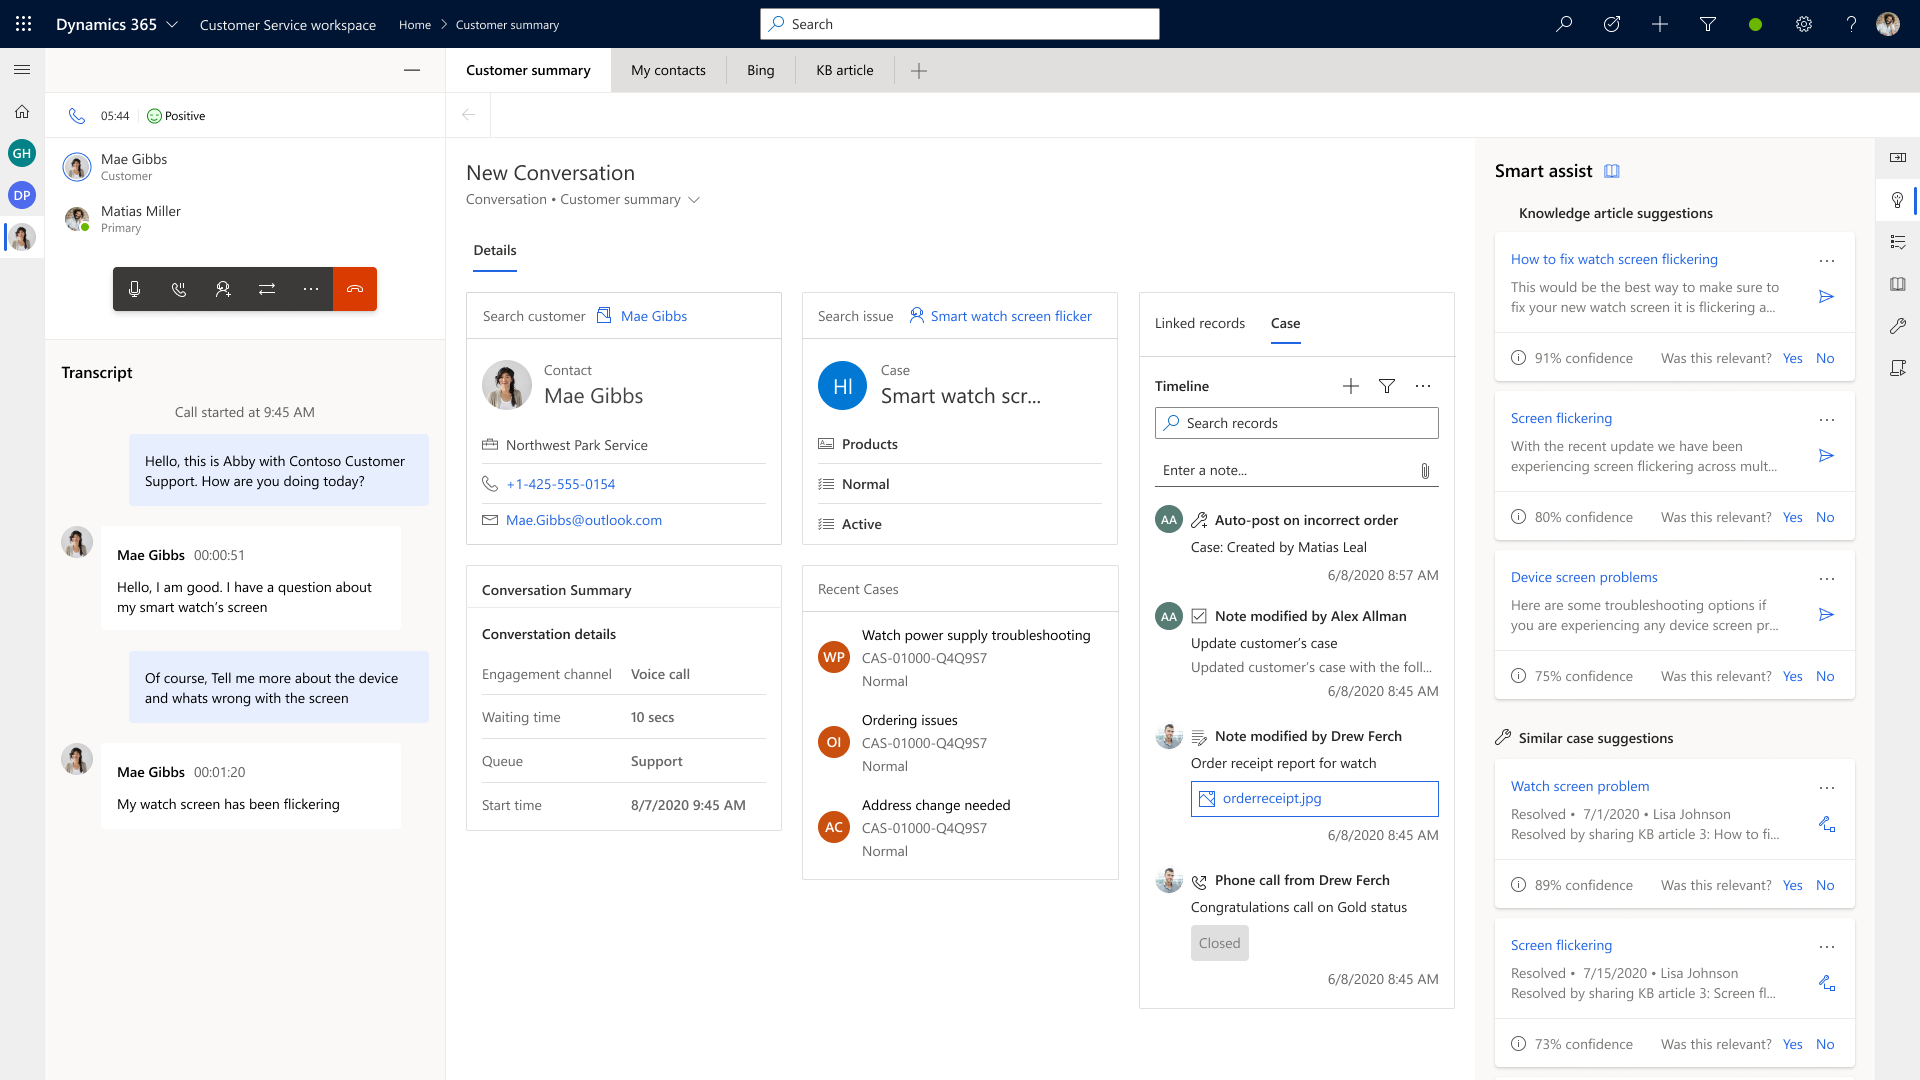 With the Dynamics 365 Customer Service, agents can view the real-time call transcript while on the call, see the customer’s details, recent and related cases, and suggested knowledge articles and similar cases that can help agents resolve customer issue more quickly